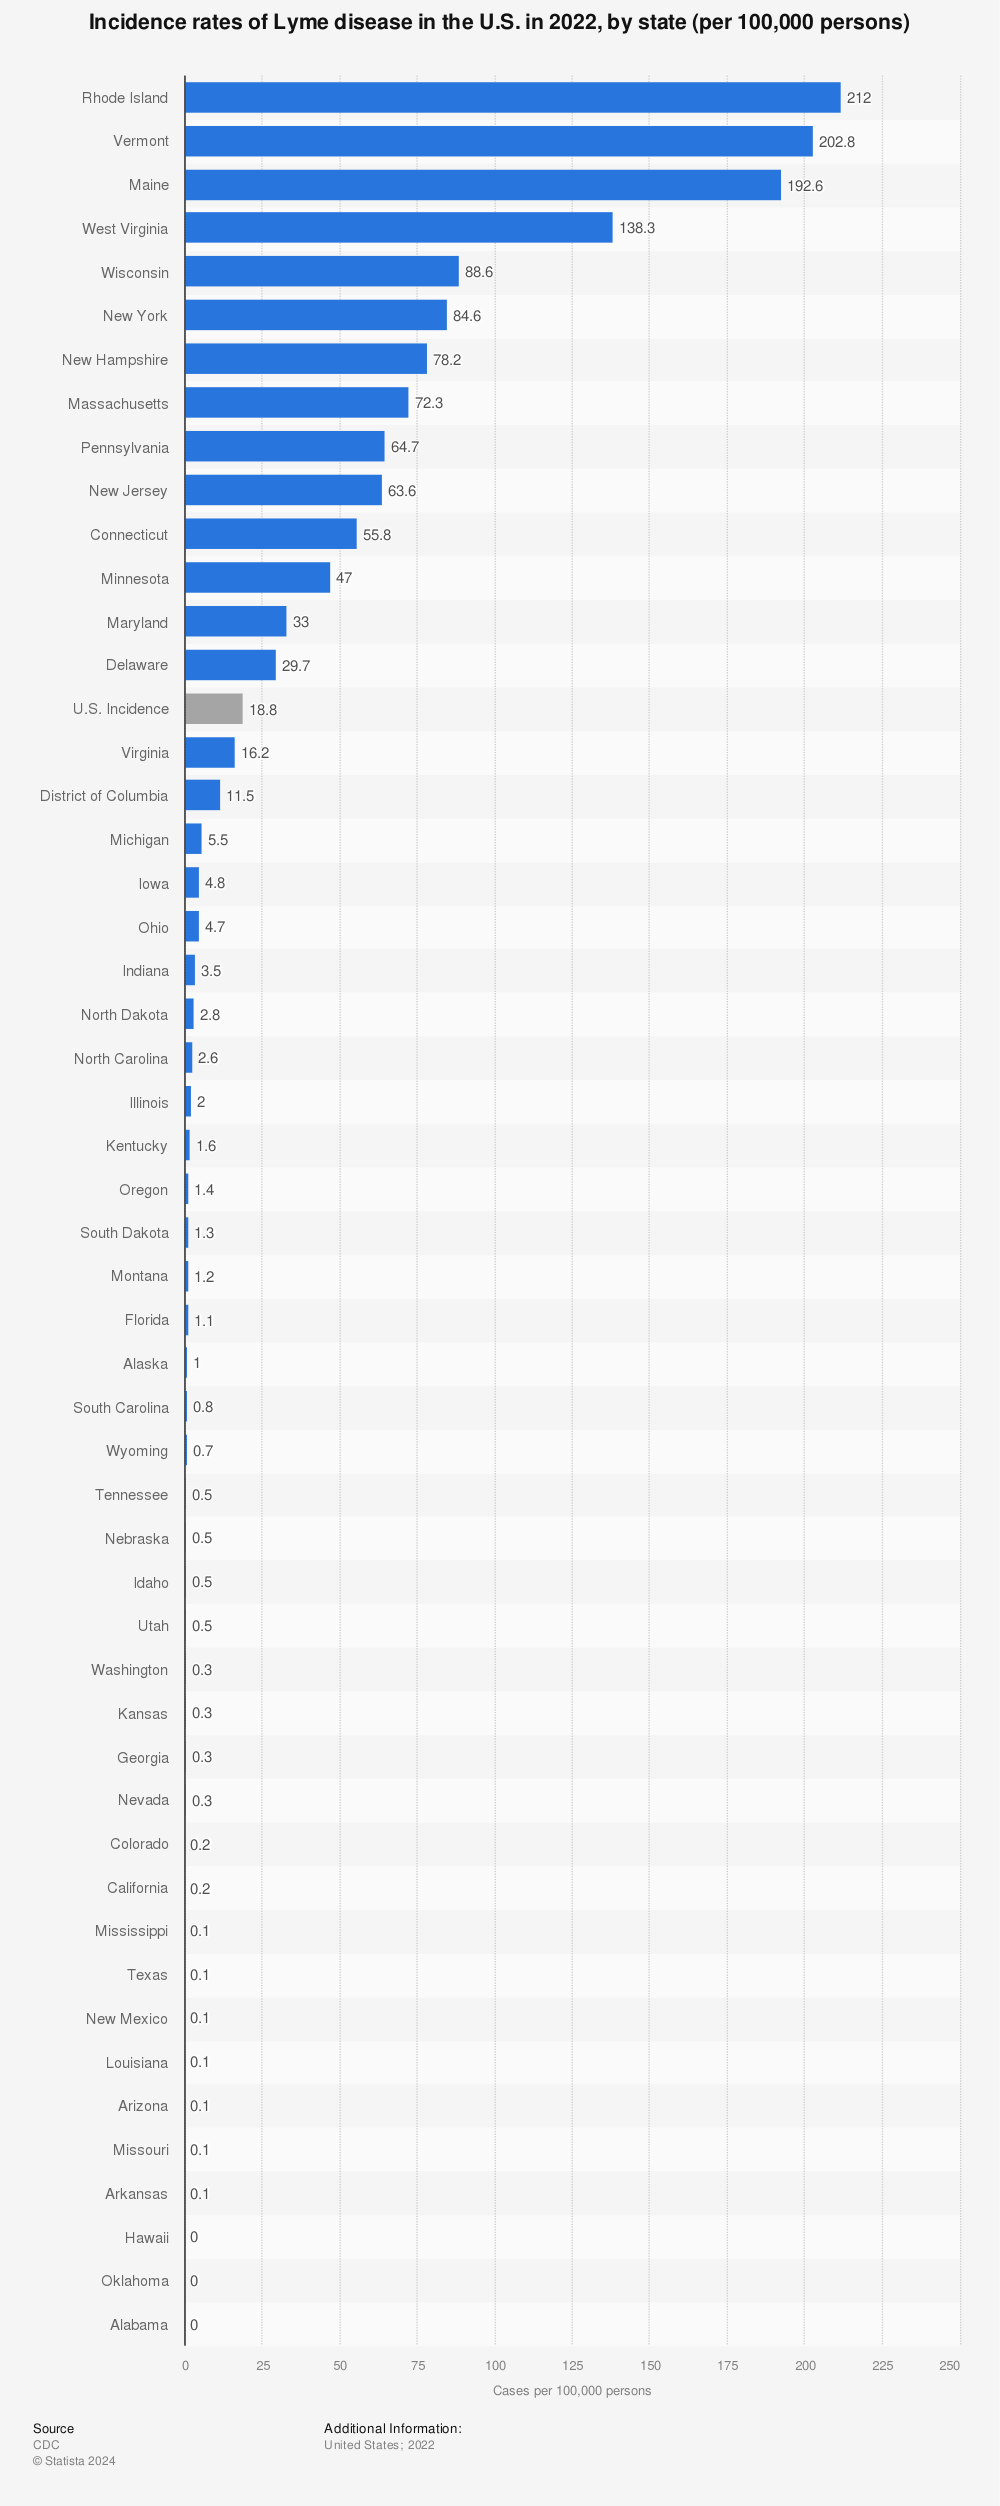 Statistic: Incidence rates of Lyme disease in the U.S. in 2019, by state (per 100,000 persons) | Statista